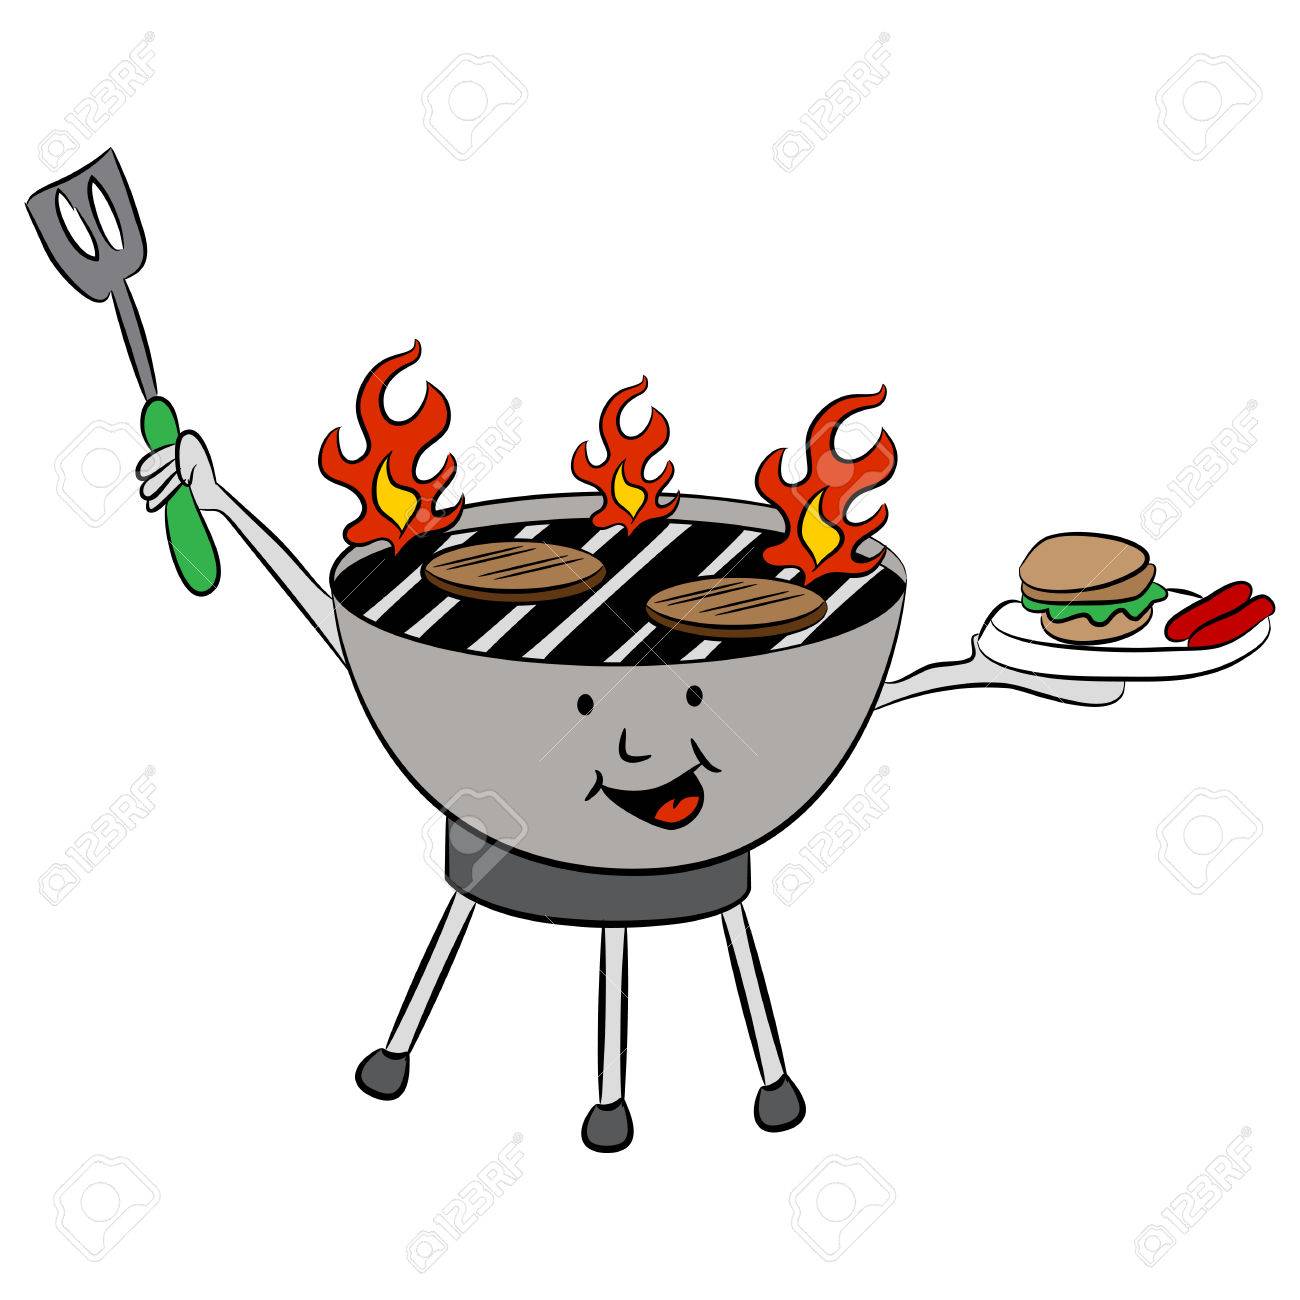 Grilling clipart summer. Barbecue grill free download